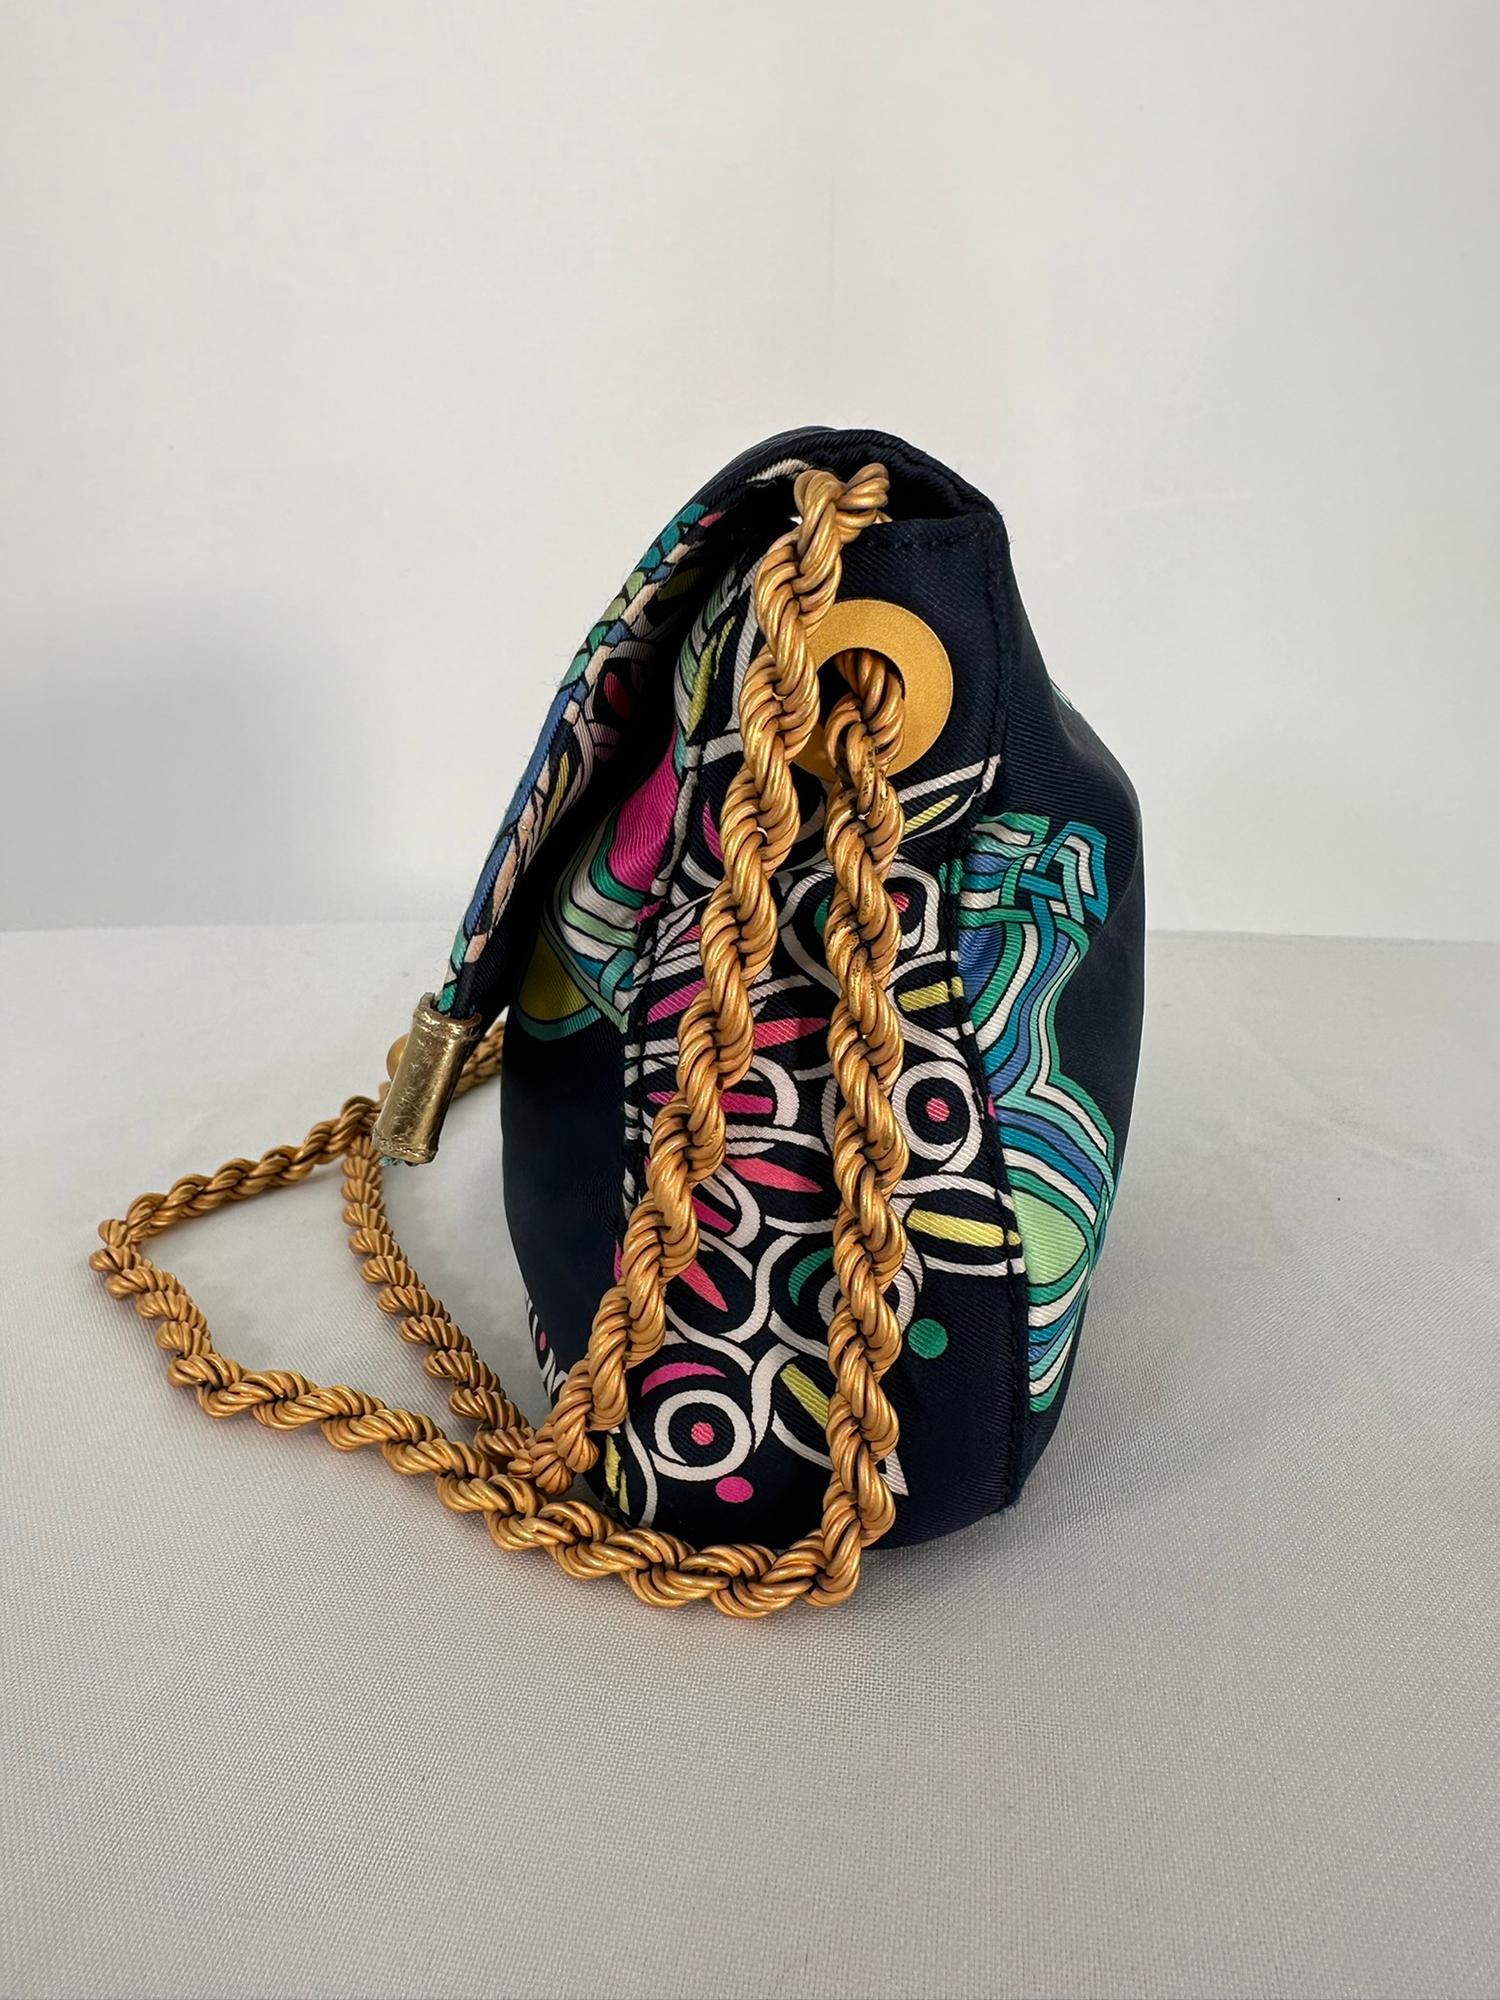 Emilio Pucci navy blue brightly printed flap front gold hardware hand bag matte gold chain strap. Navy blue nylon with a bright abstract print throughout. The flap front bag closes with a turnlock, gold hardware with a white acrylic diamond at the